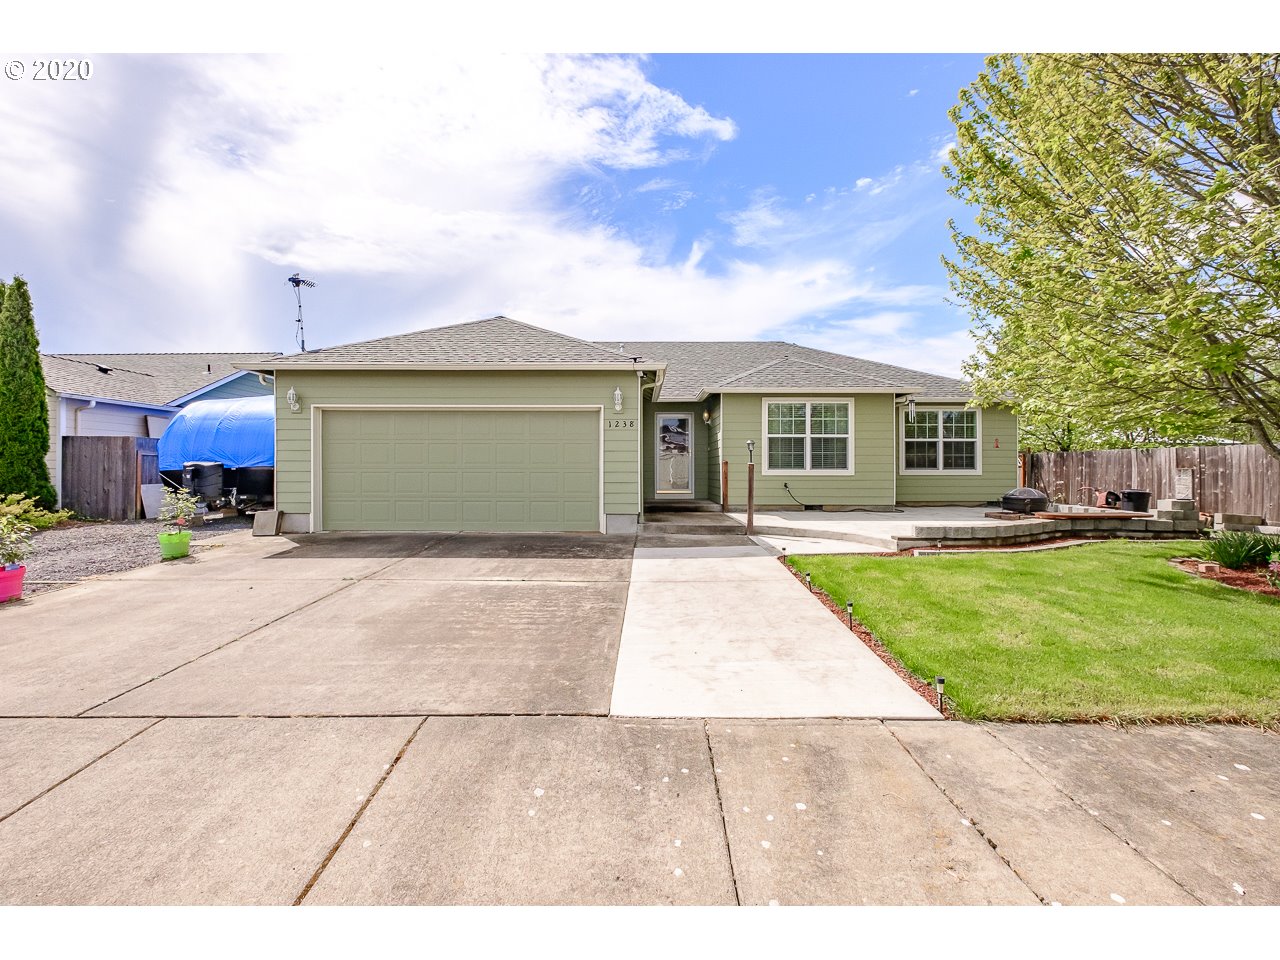 1238 46TH CT (1 of 32)